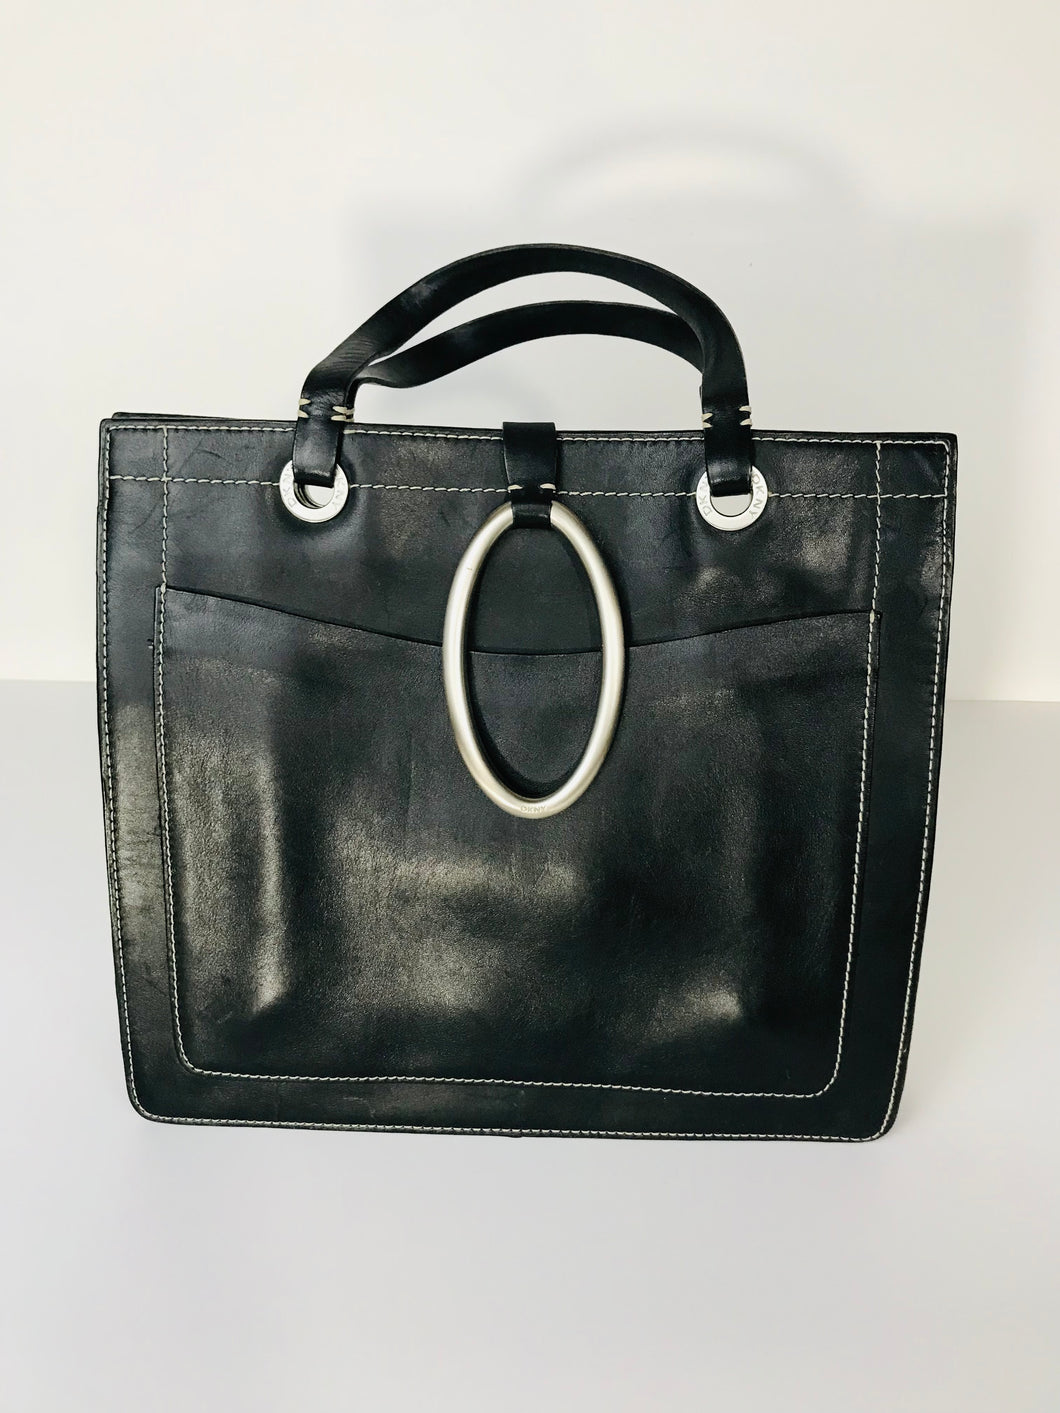 DKNY Women's Leather Tote Bag | S | Black